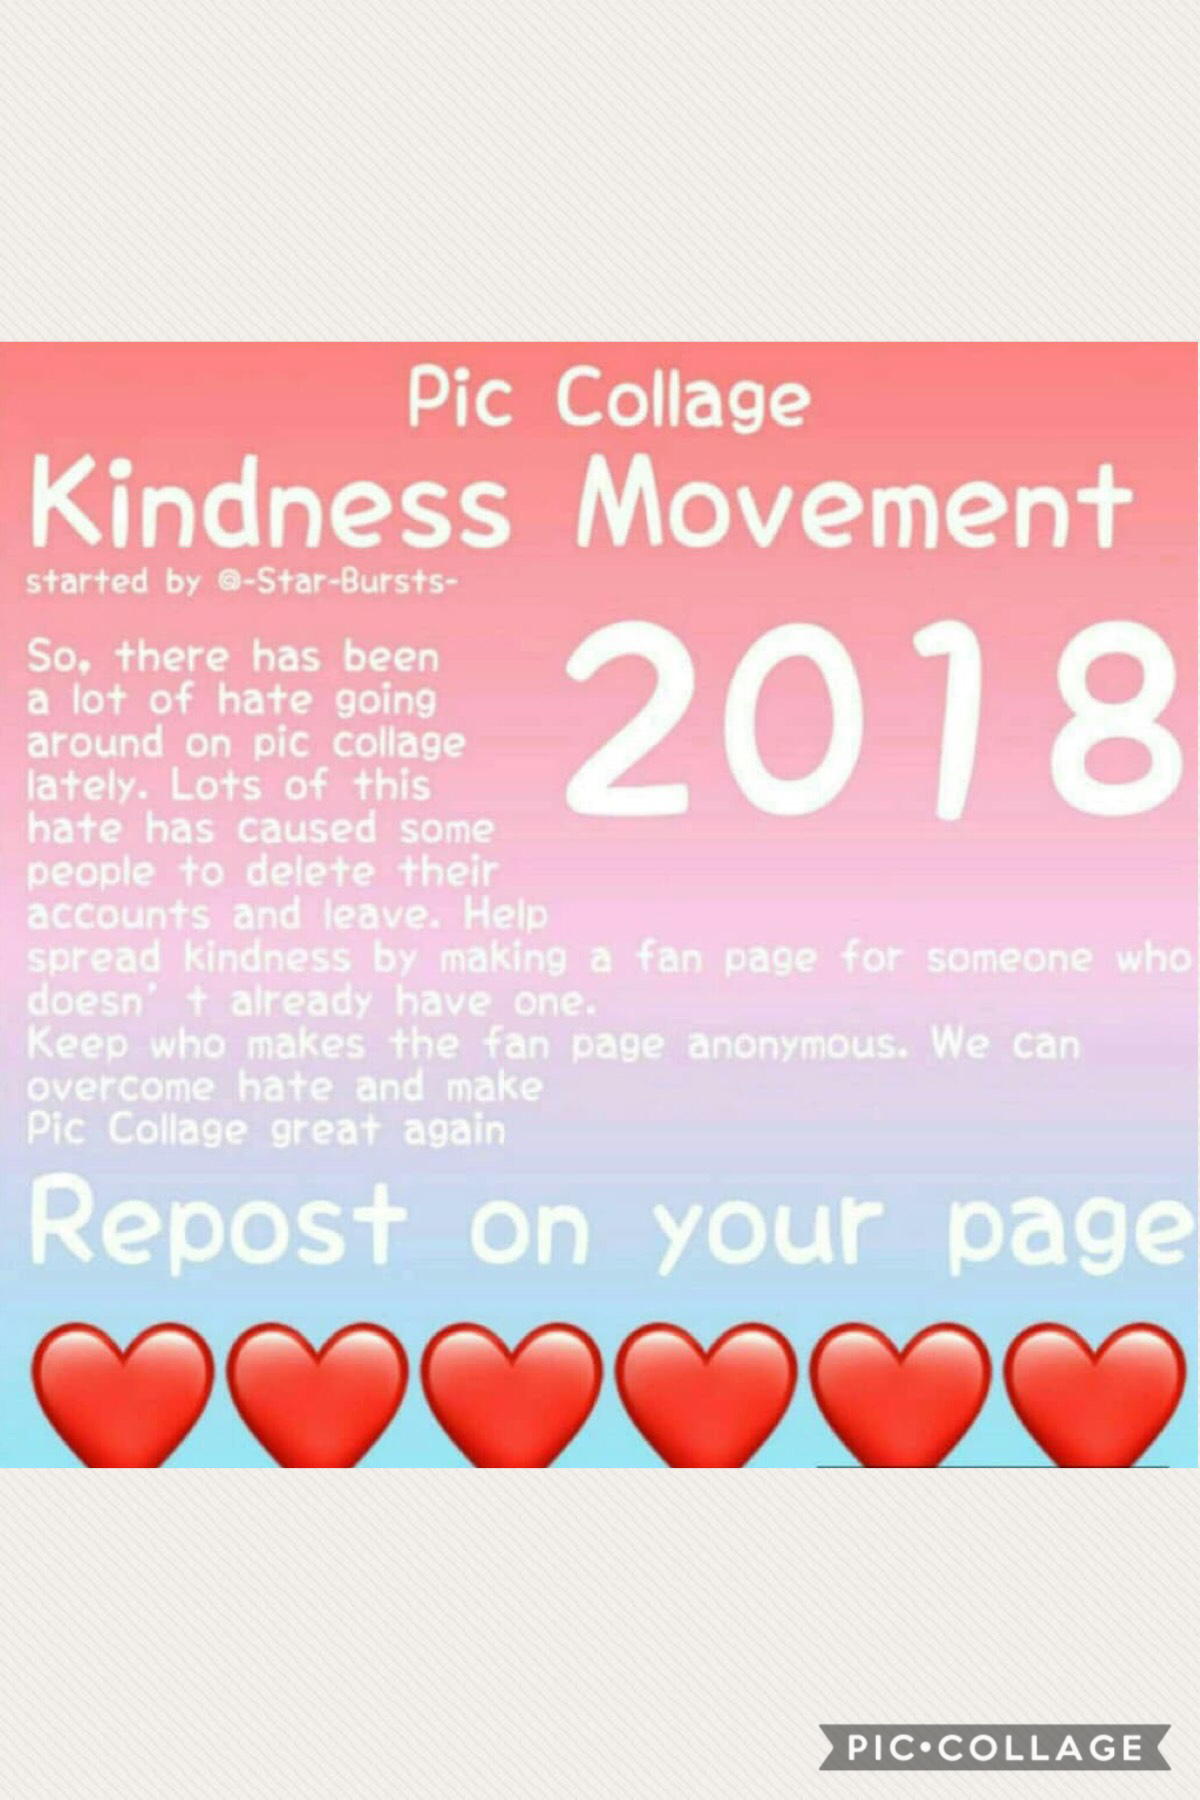 KINDNESS MOVEMENT!!
Repost on ur page!!